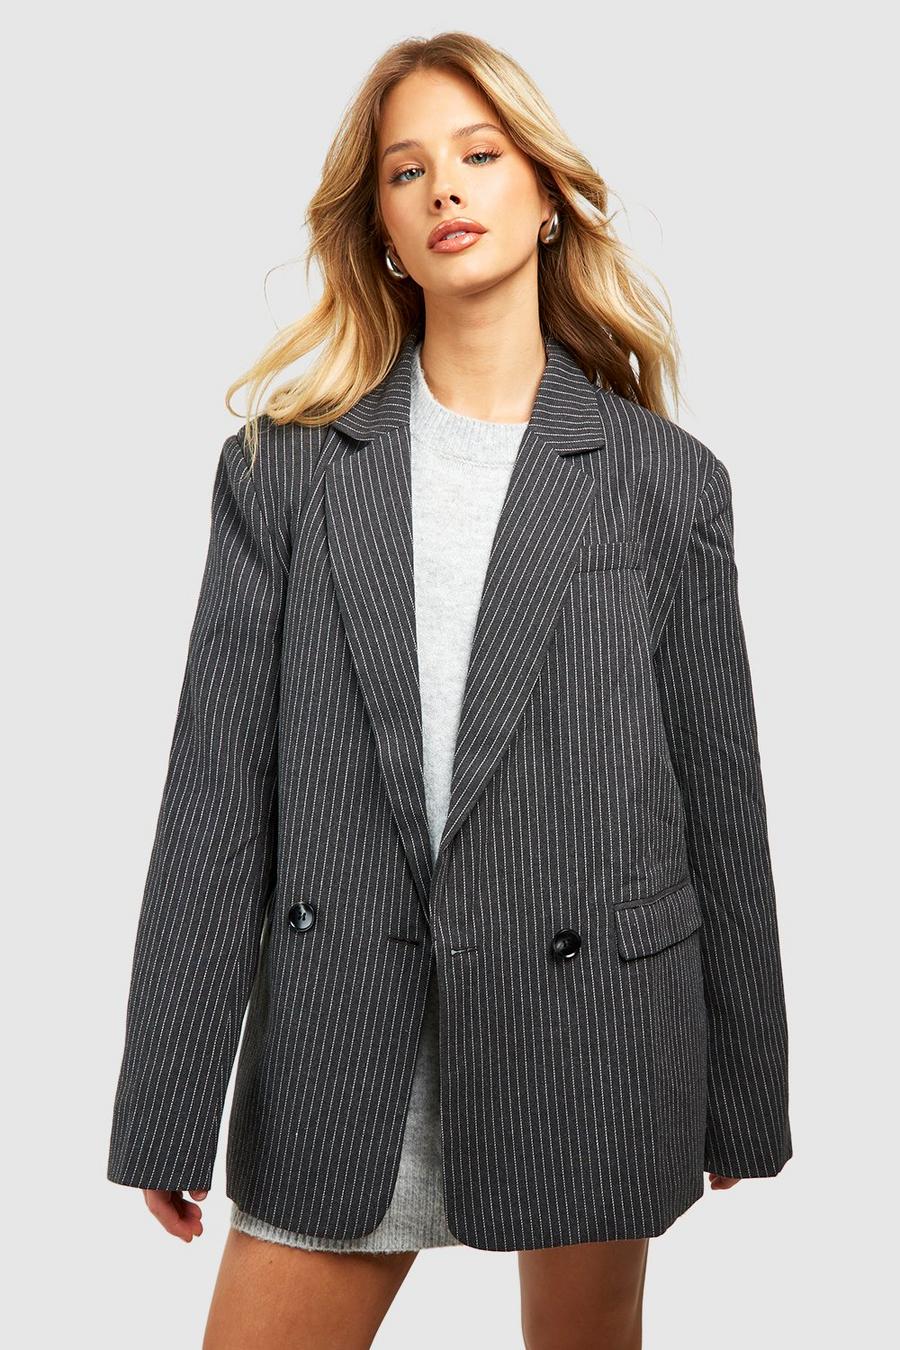 Charcoal grey Marl Pinstripe Relaxed Fit Tailored Blazer